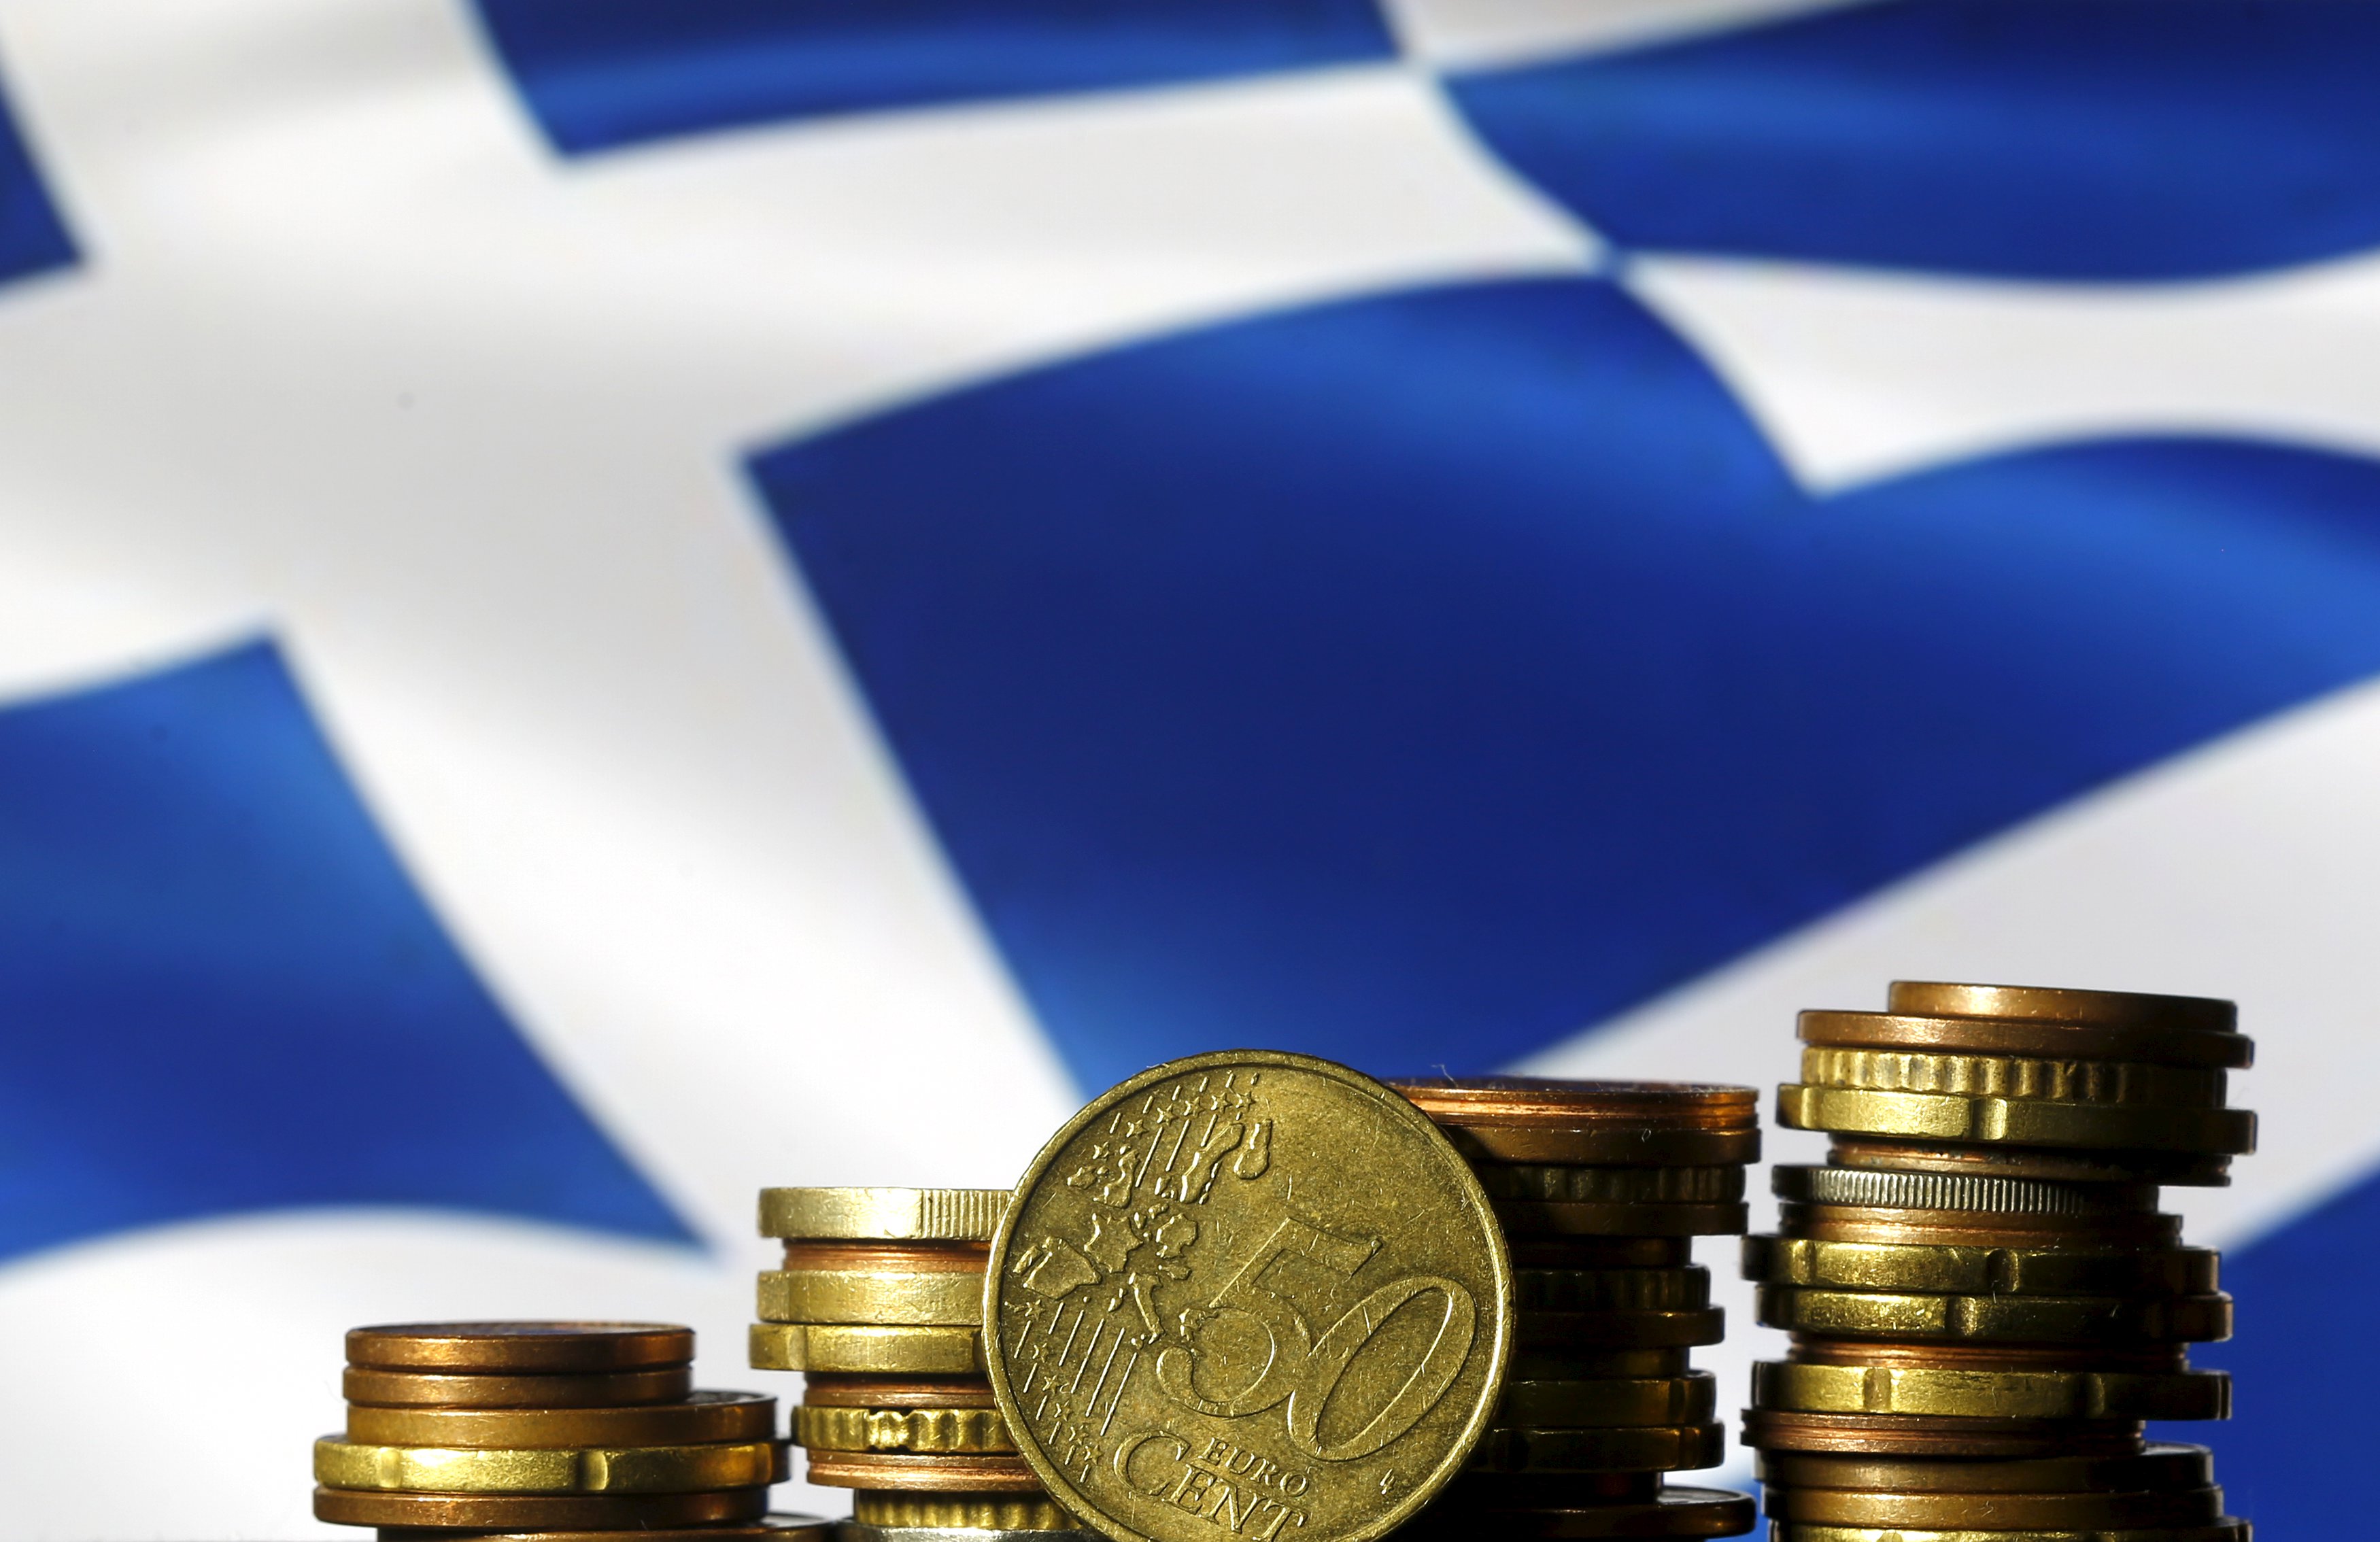 Greece and its international creditors have been locked in negotiations for months over new loans.